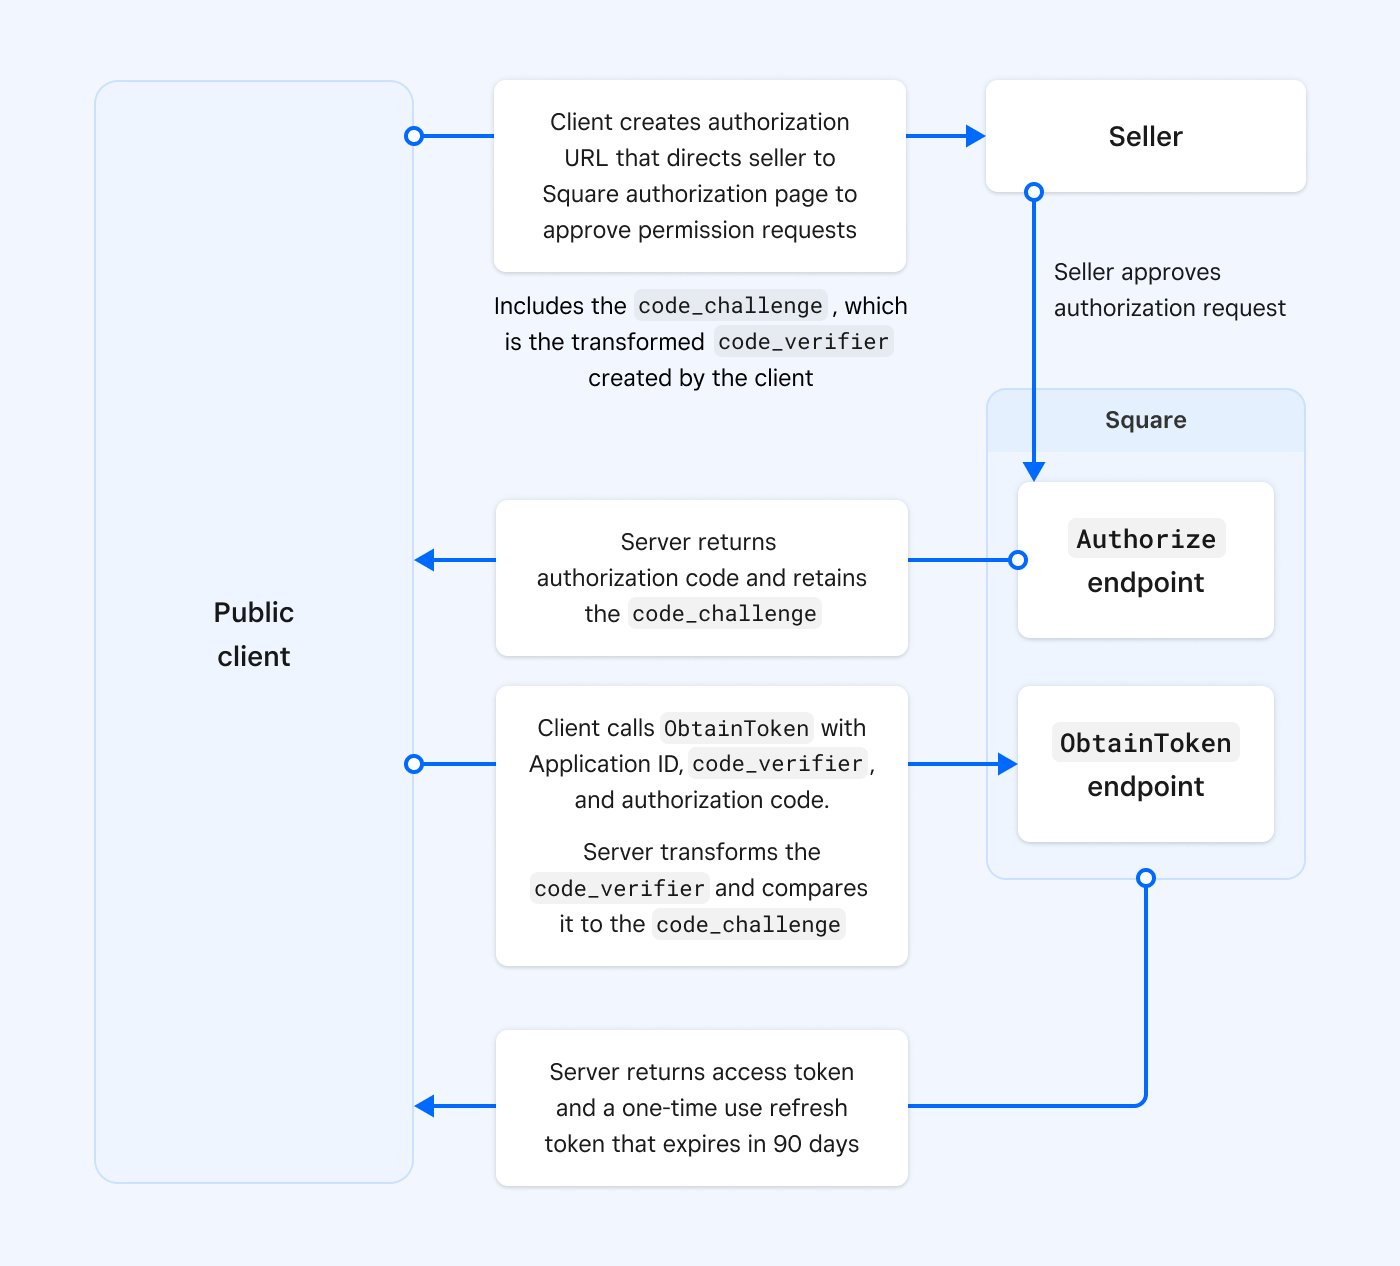 A graphic showing the process flow for the OAuth PKCE flow.